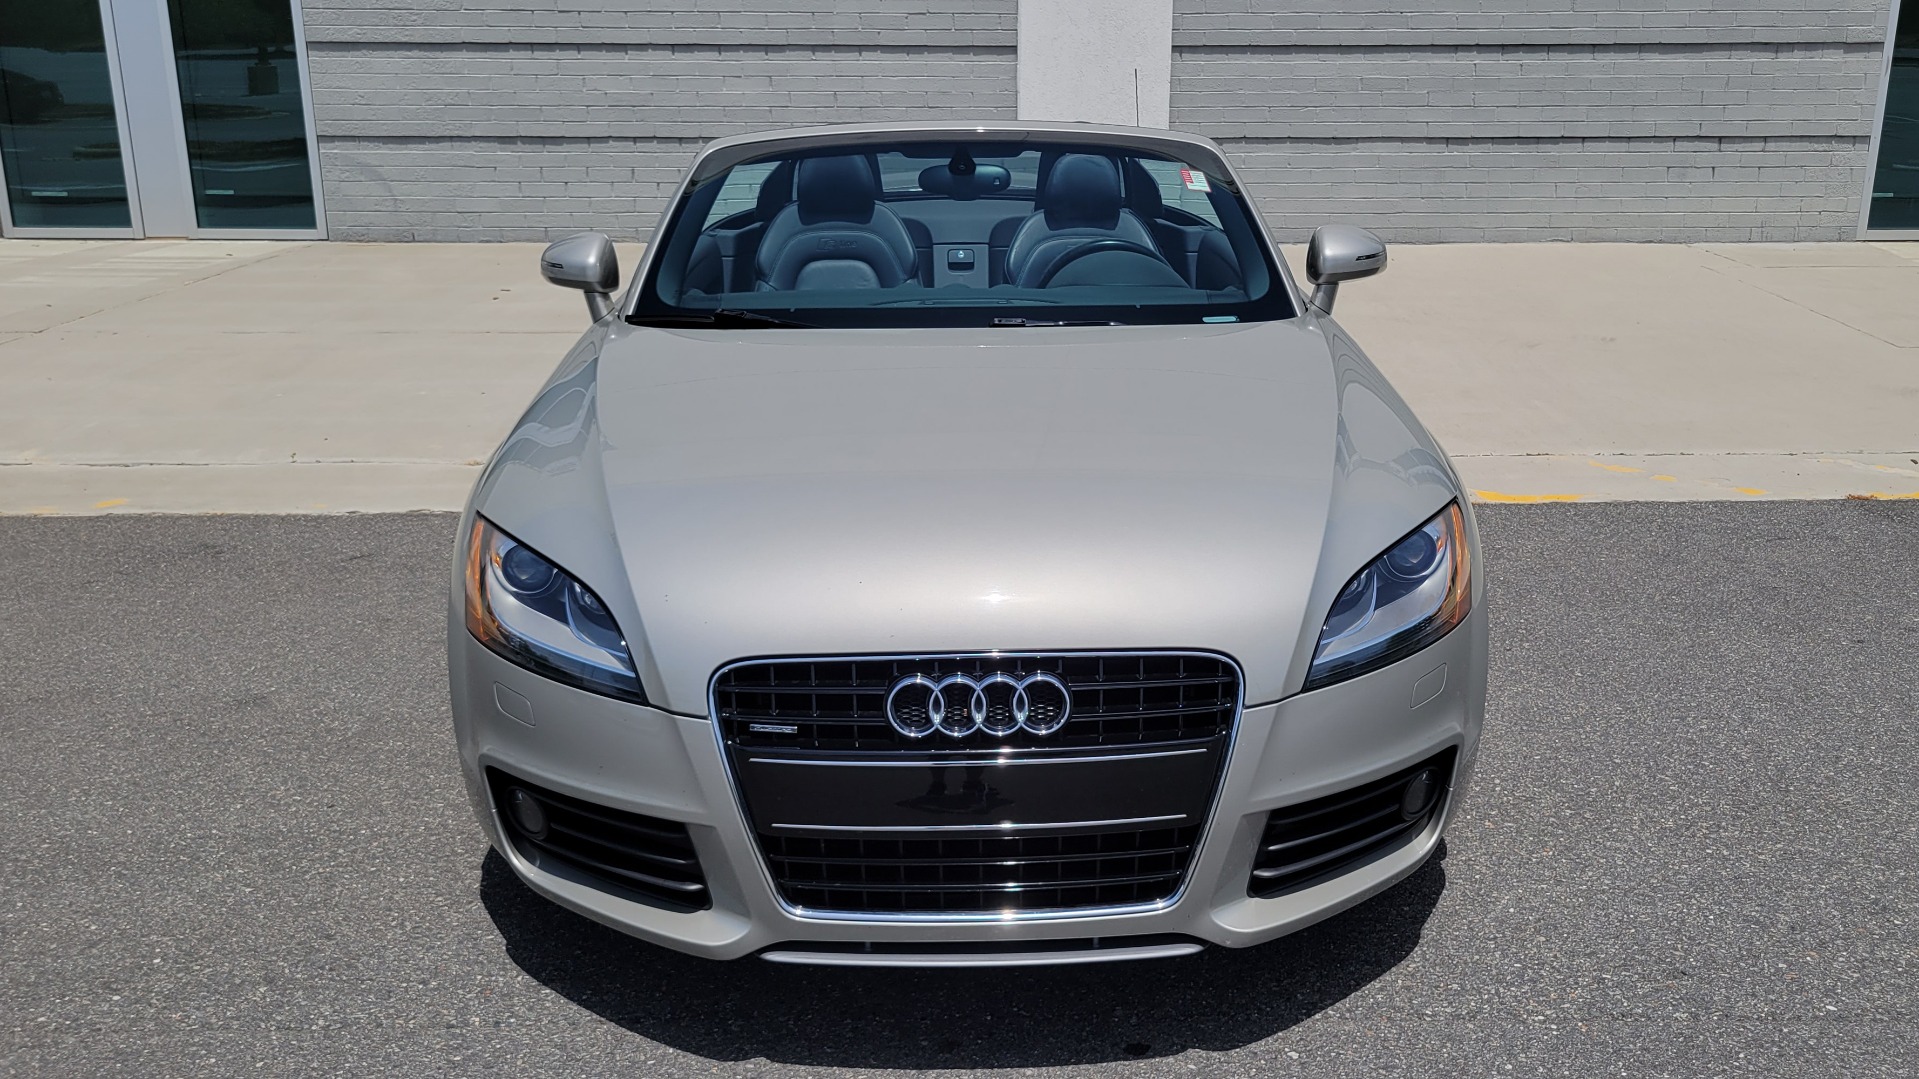 Used 2008 Audi TT 3.2L CONVERTIBLE / MANUAL / 19IN WHEELS / LOW MILES for sale Sold at Formula Imports in Charlotte NC 28227 12